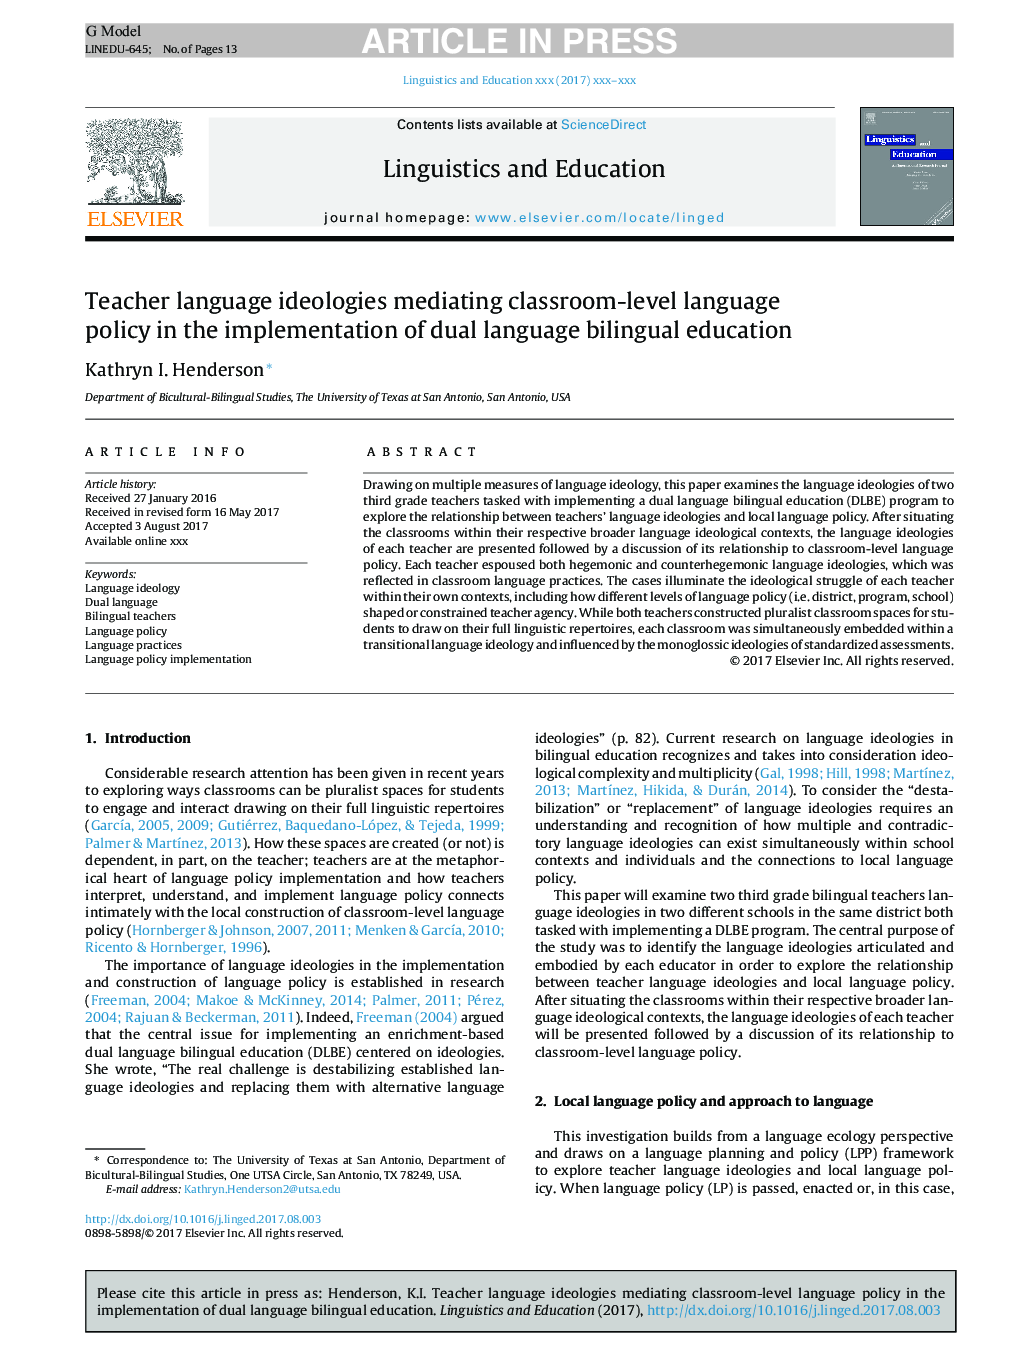 Teacher language ideologies mediating classroom-level language policy in the implementation of dual language bilingual education